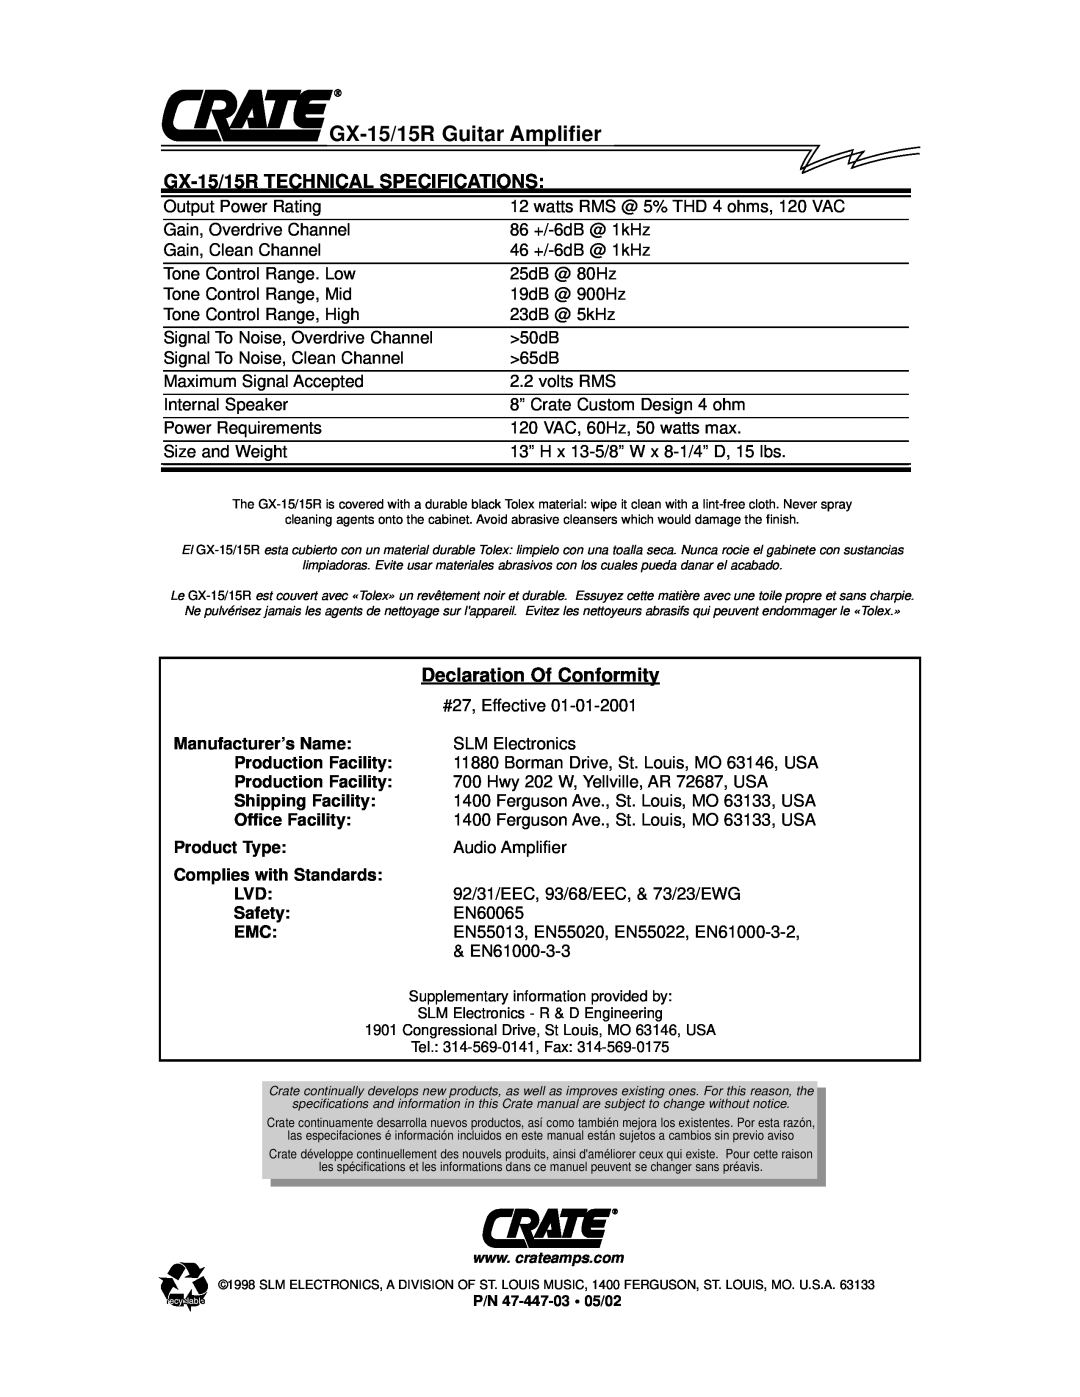 Crate Amplifiers GX-15R owner manual GX-15/15R TECHNICAL SPECIFICATIONS, Declaration Of Conformity 